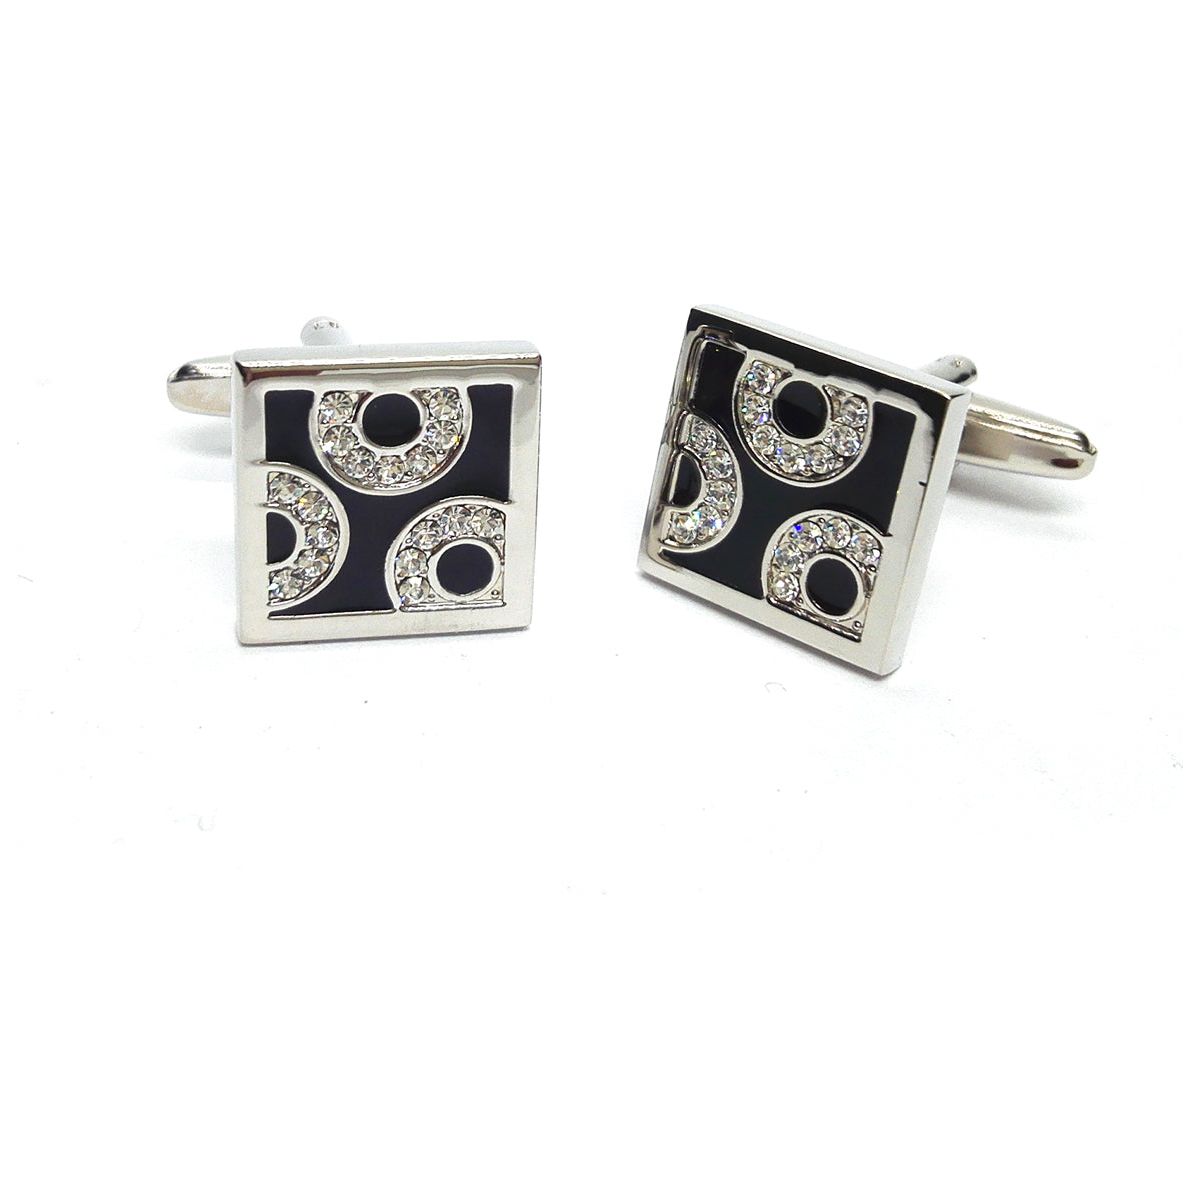 Square Black with Crystal Circle Crystals Cufflinks - Ashton and Finch